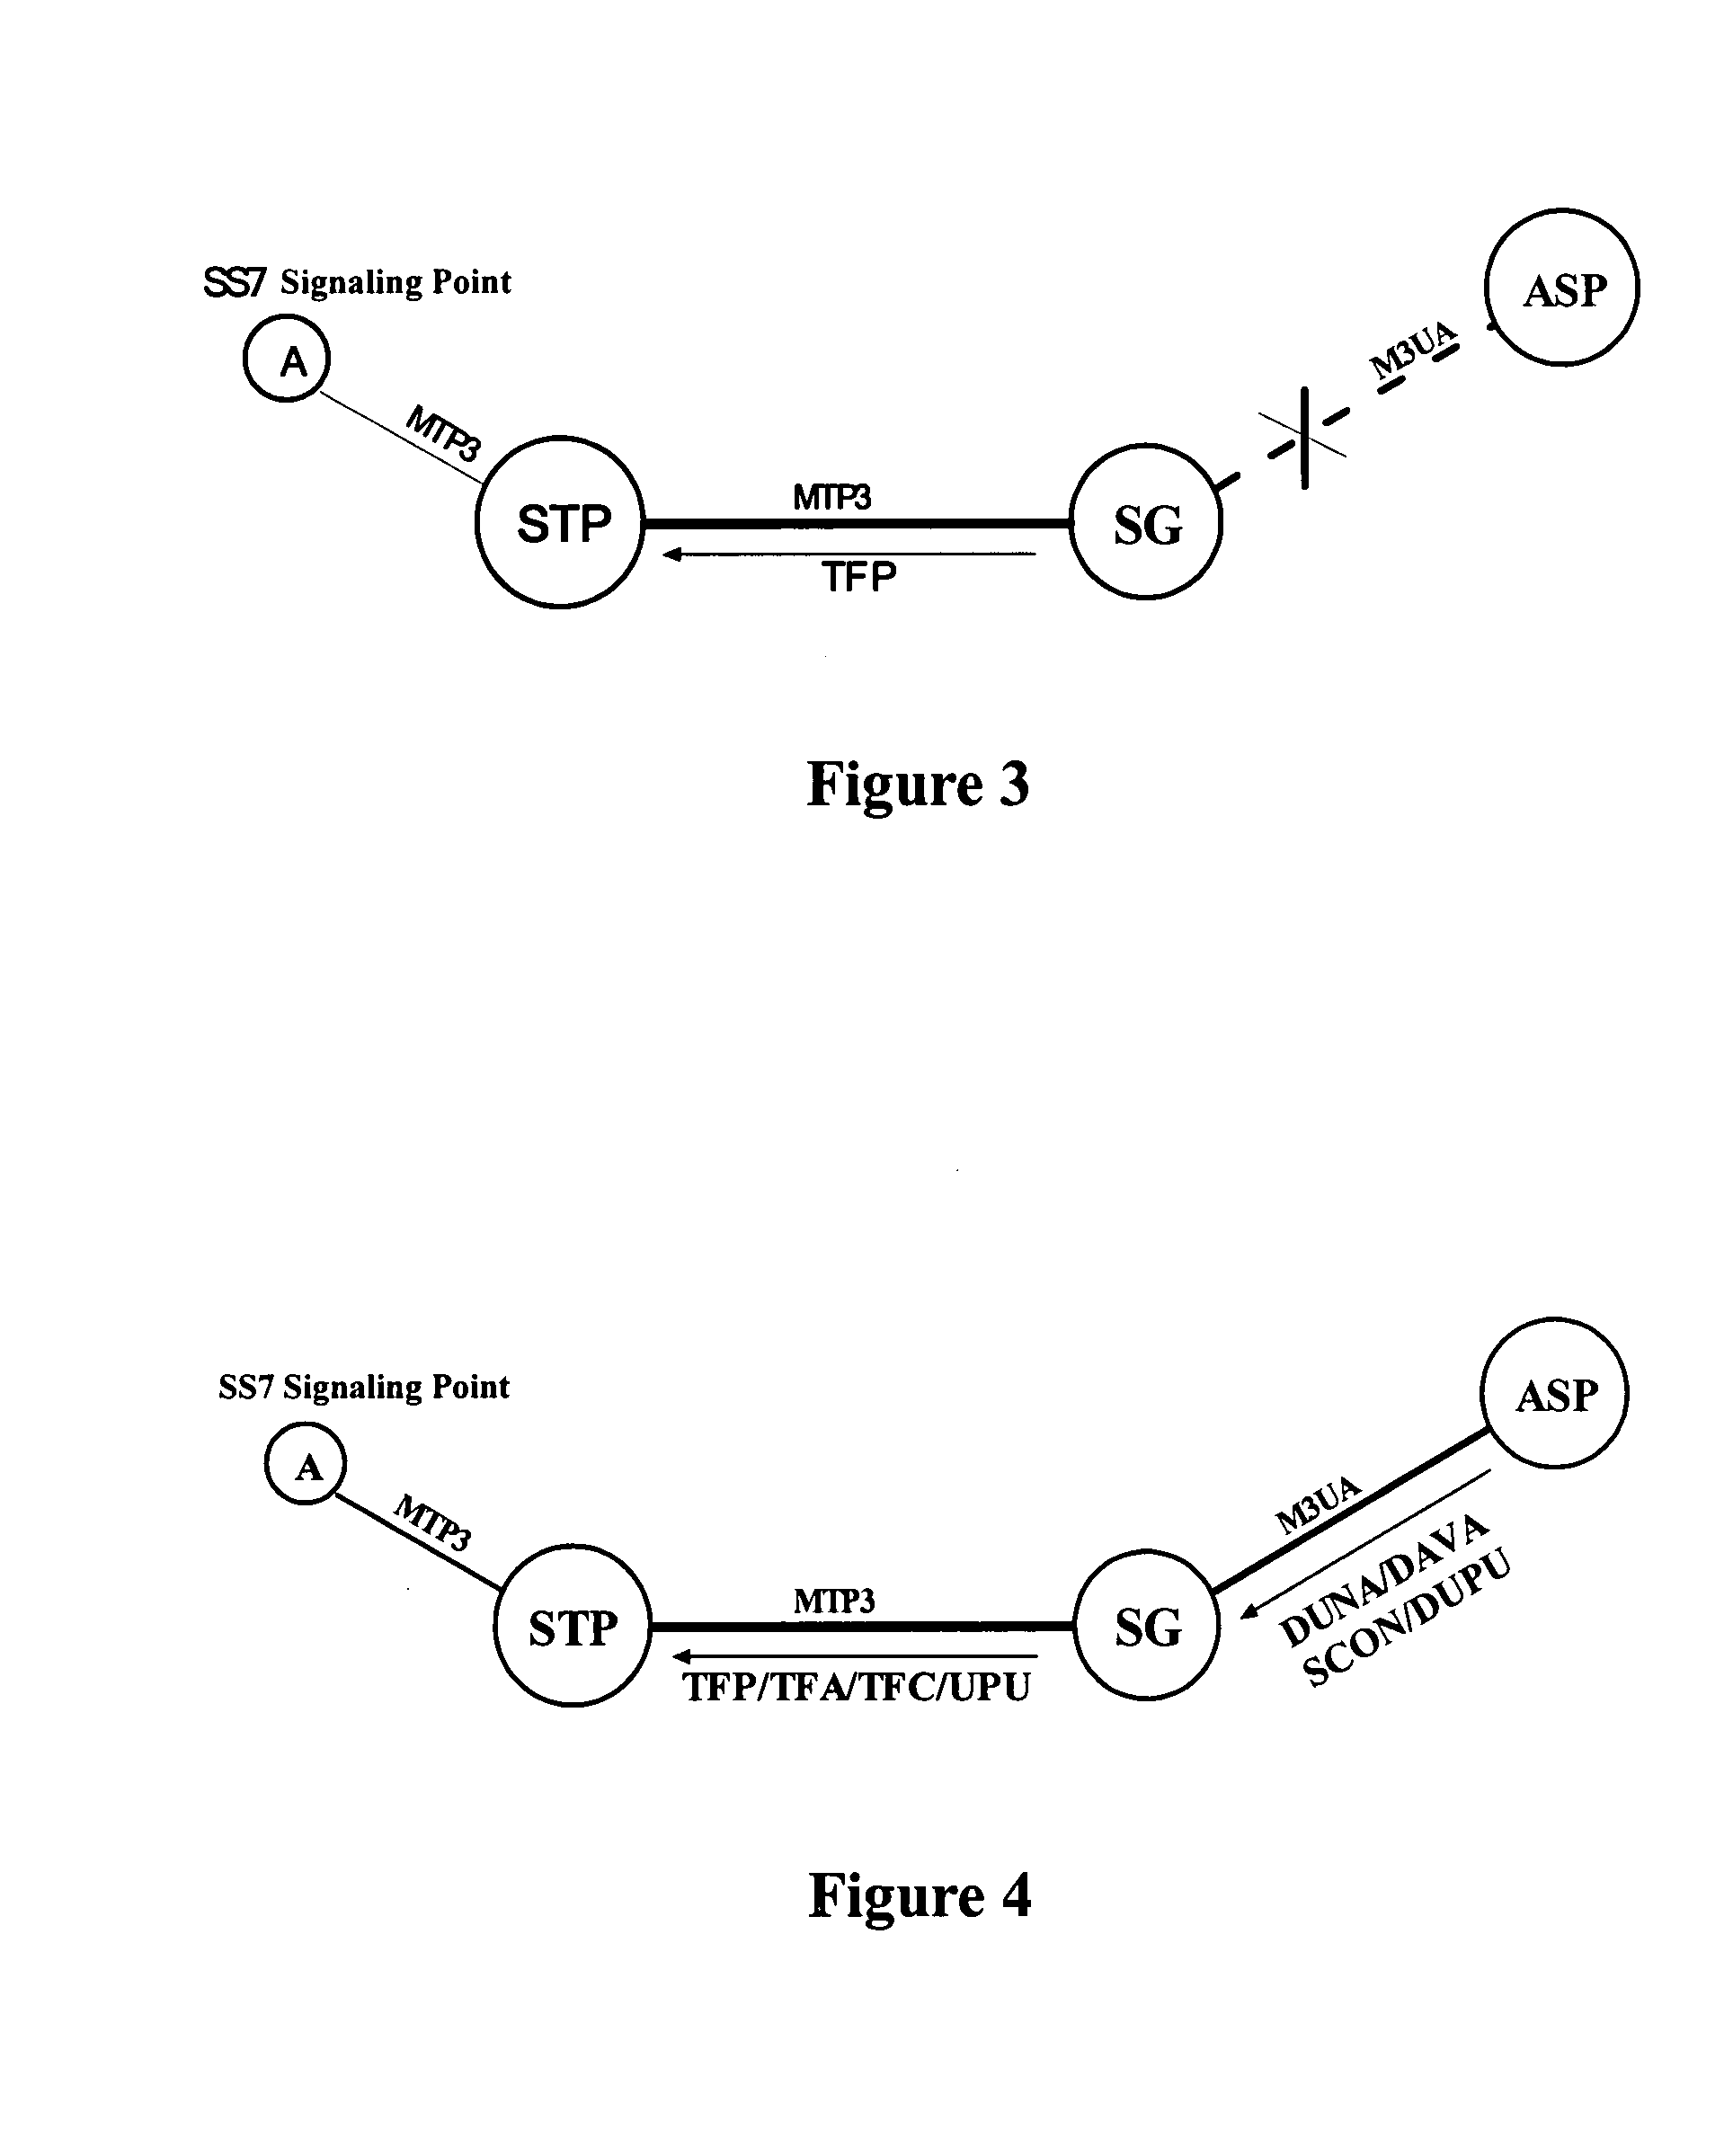 Method for reducing service loss in interworking between SS7 signaling network and M3UA, and a signaling gateway